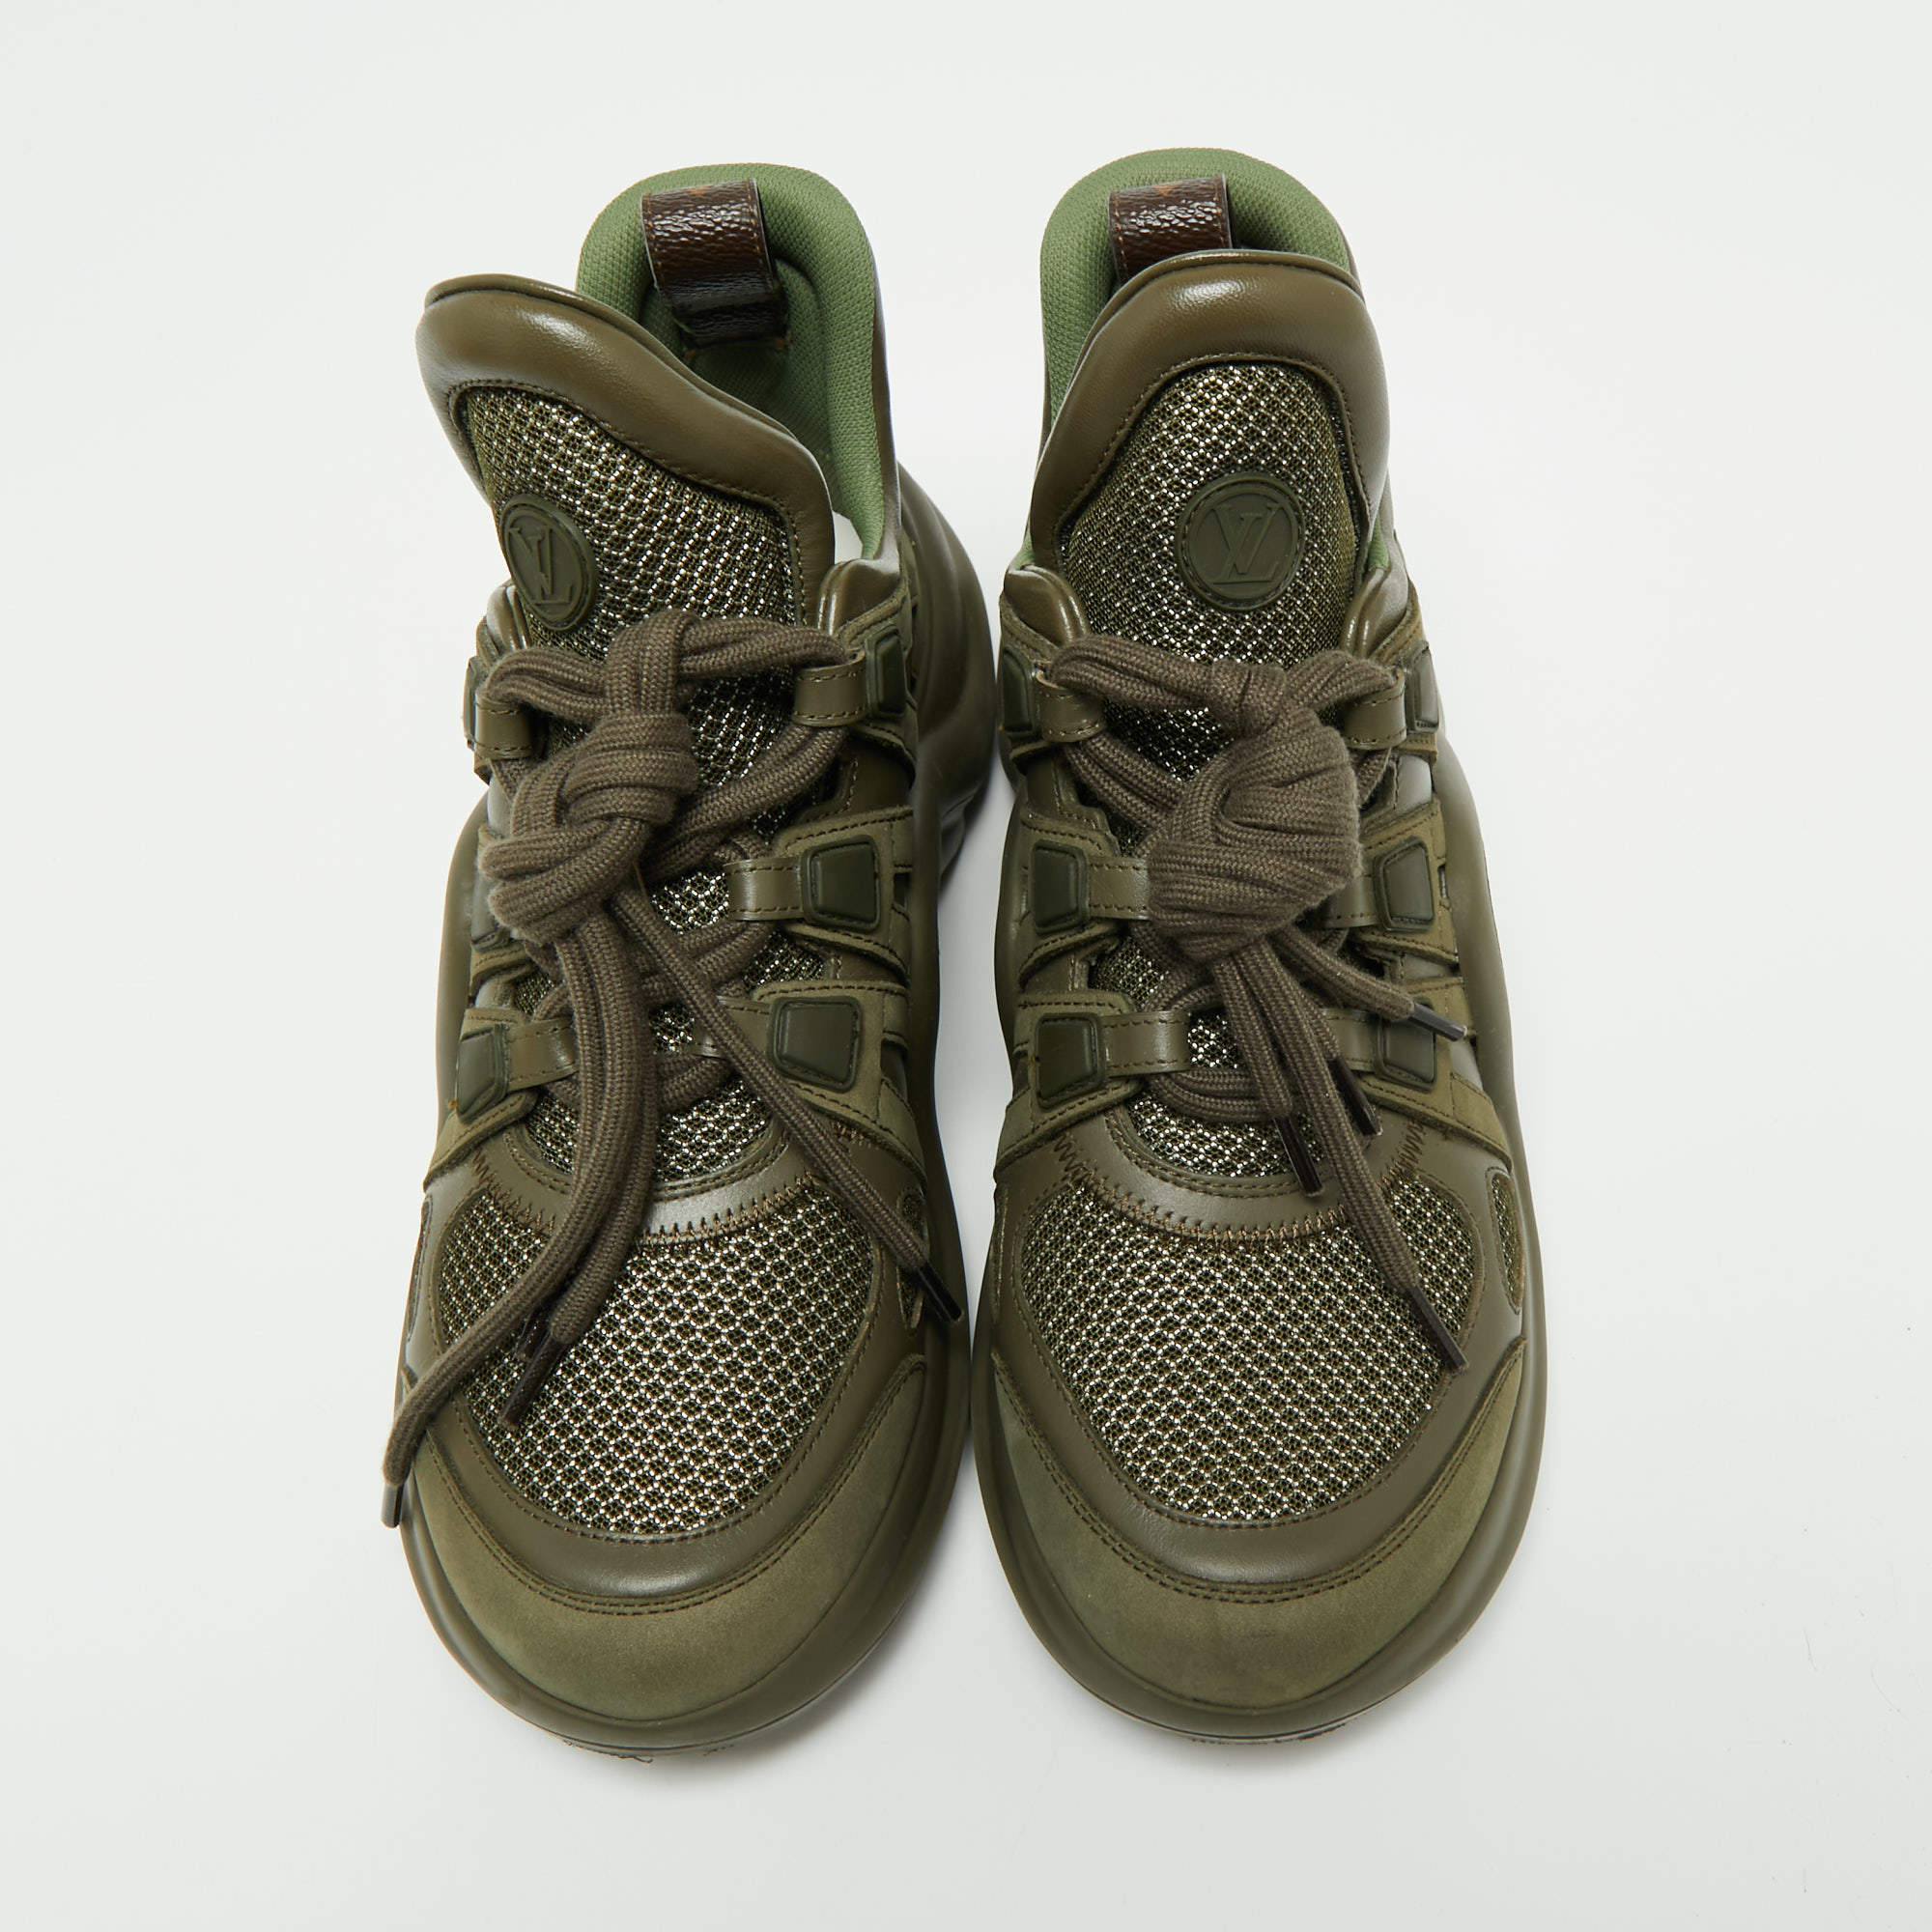 Louis Vuitton Olive Green Mesh and Leather Archlight Sneakers Size